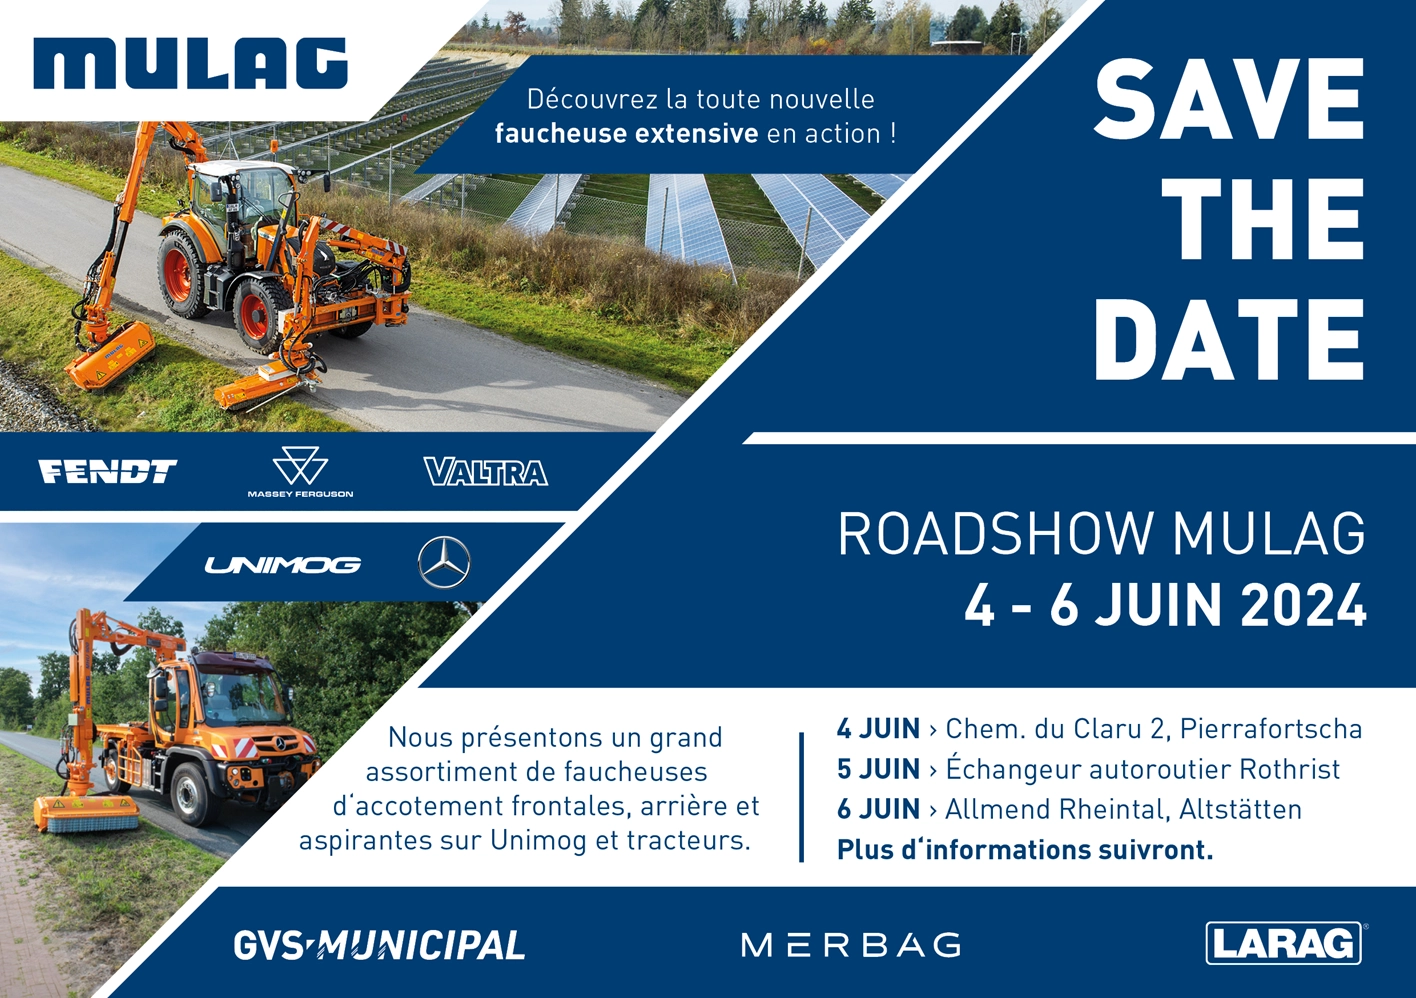 Save The Date Mulag Roadshow2024 FR